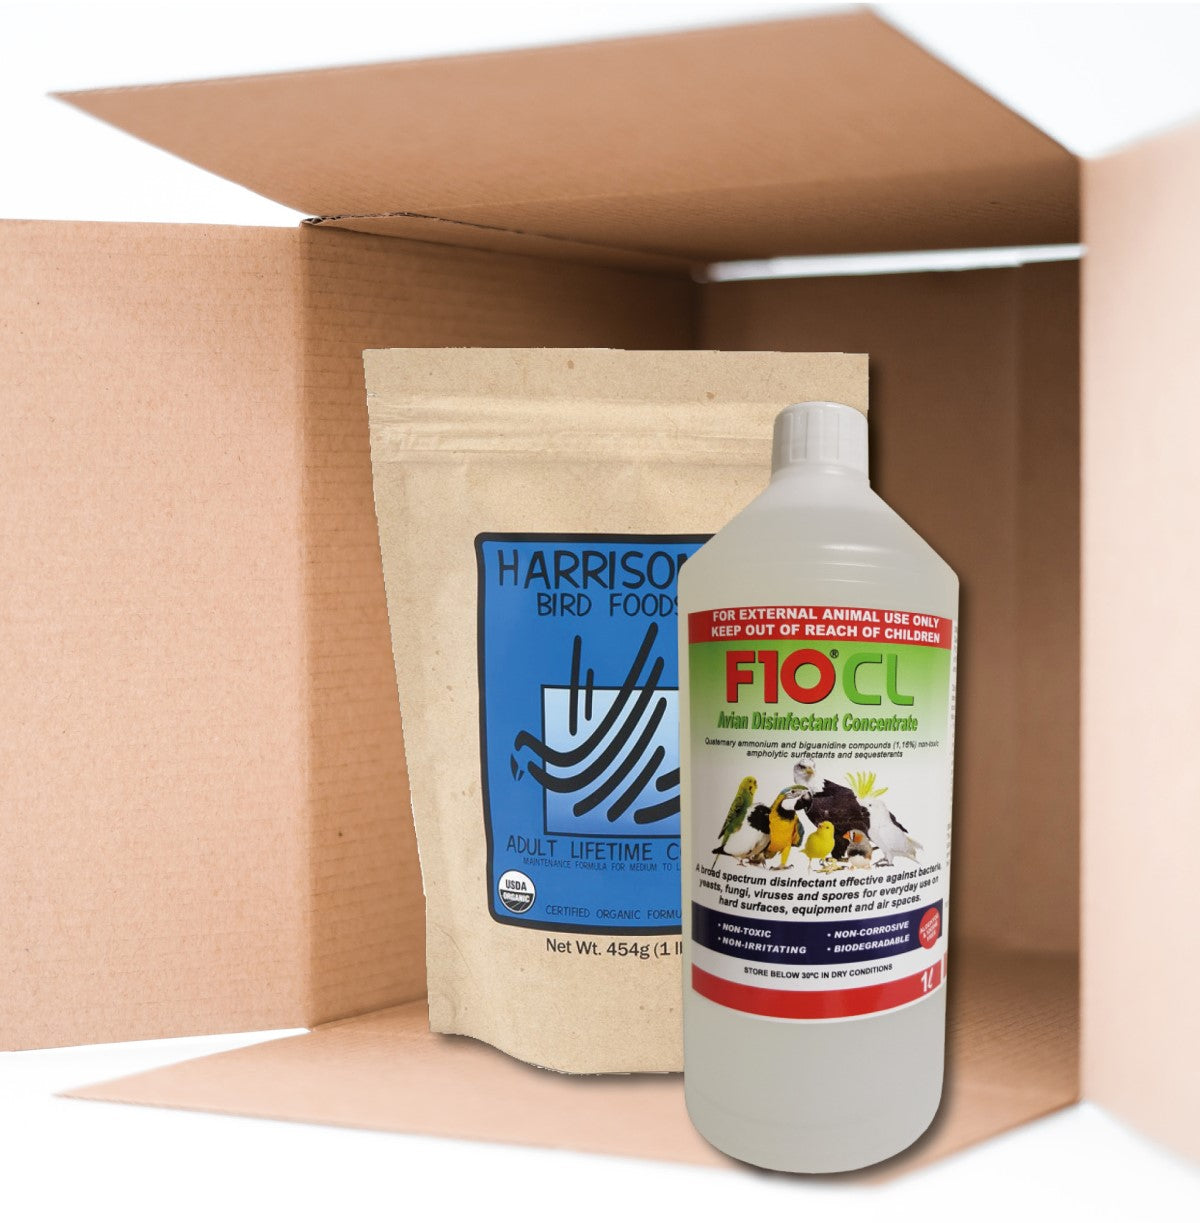 An open box containing a bag of Harrison's Adult Lifetime Coarse and a bottle of F10CL Avian Disinfectant